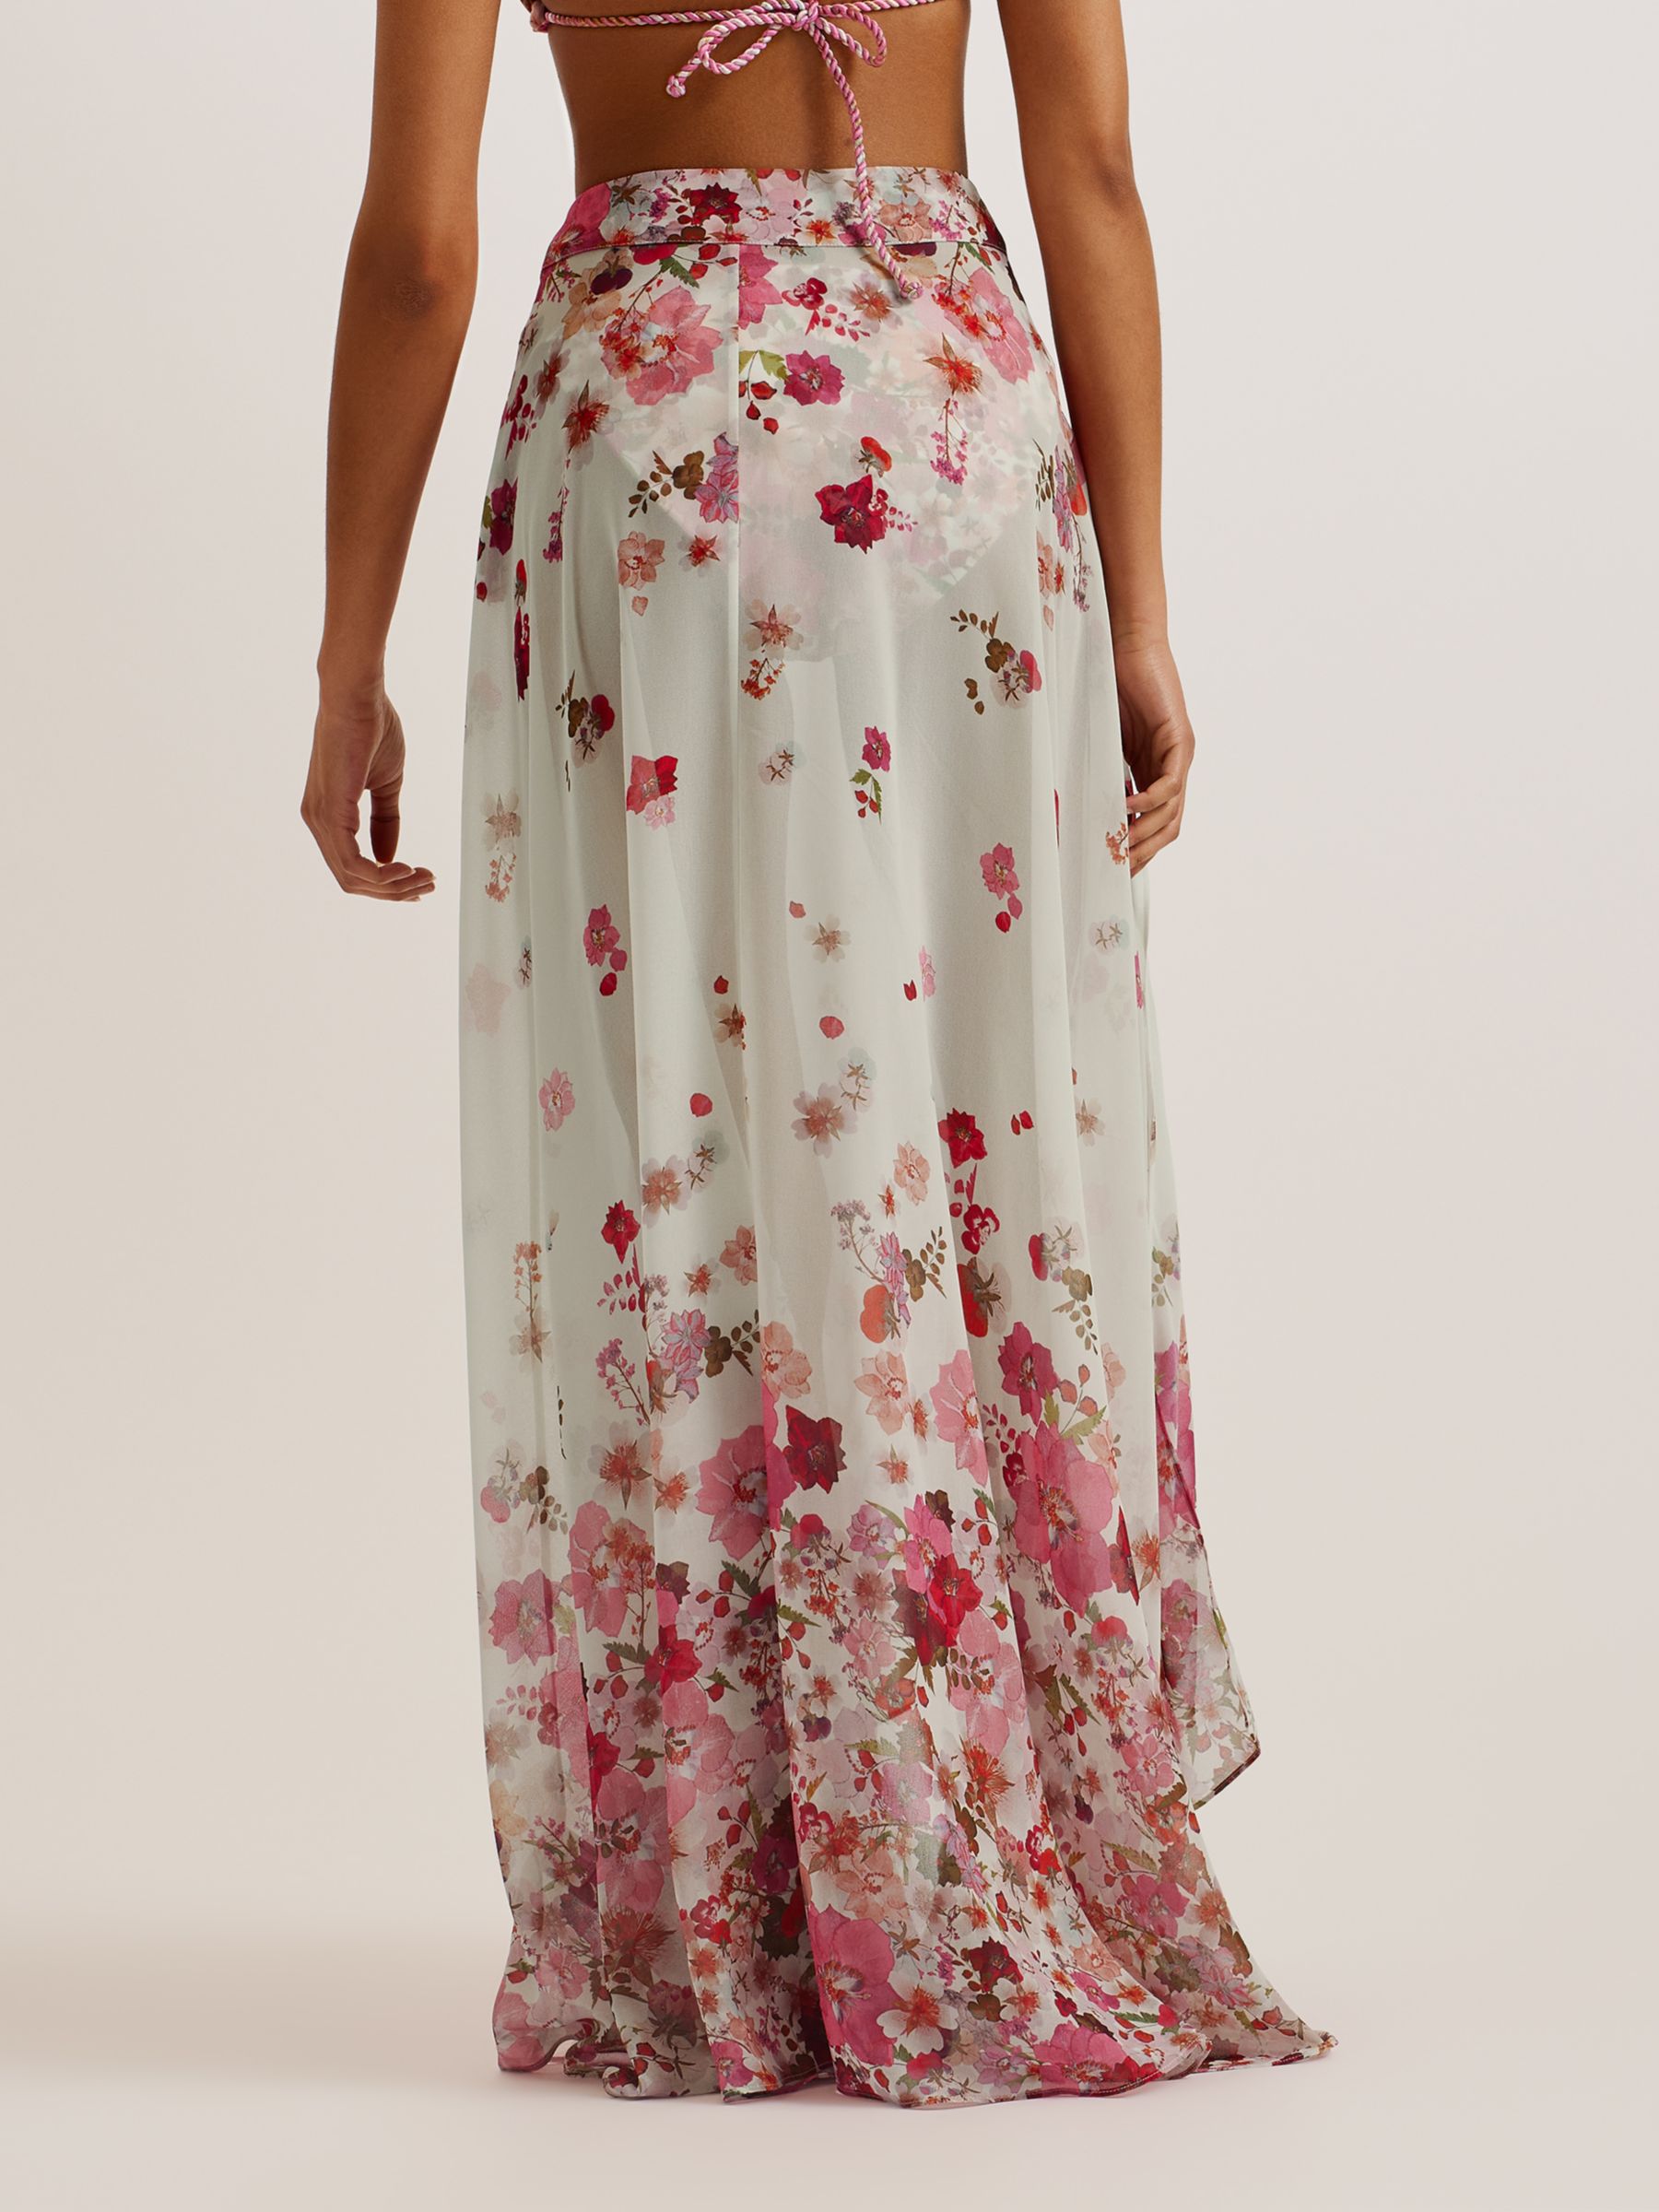 Buy Ted Baker Danisee Beach To Bar Midi Skirt Cover Up, Pink/Multi Online at johnlewis.com